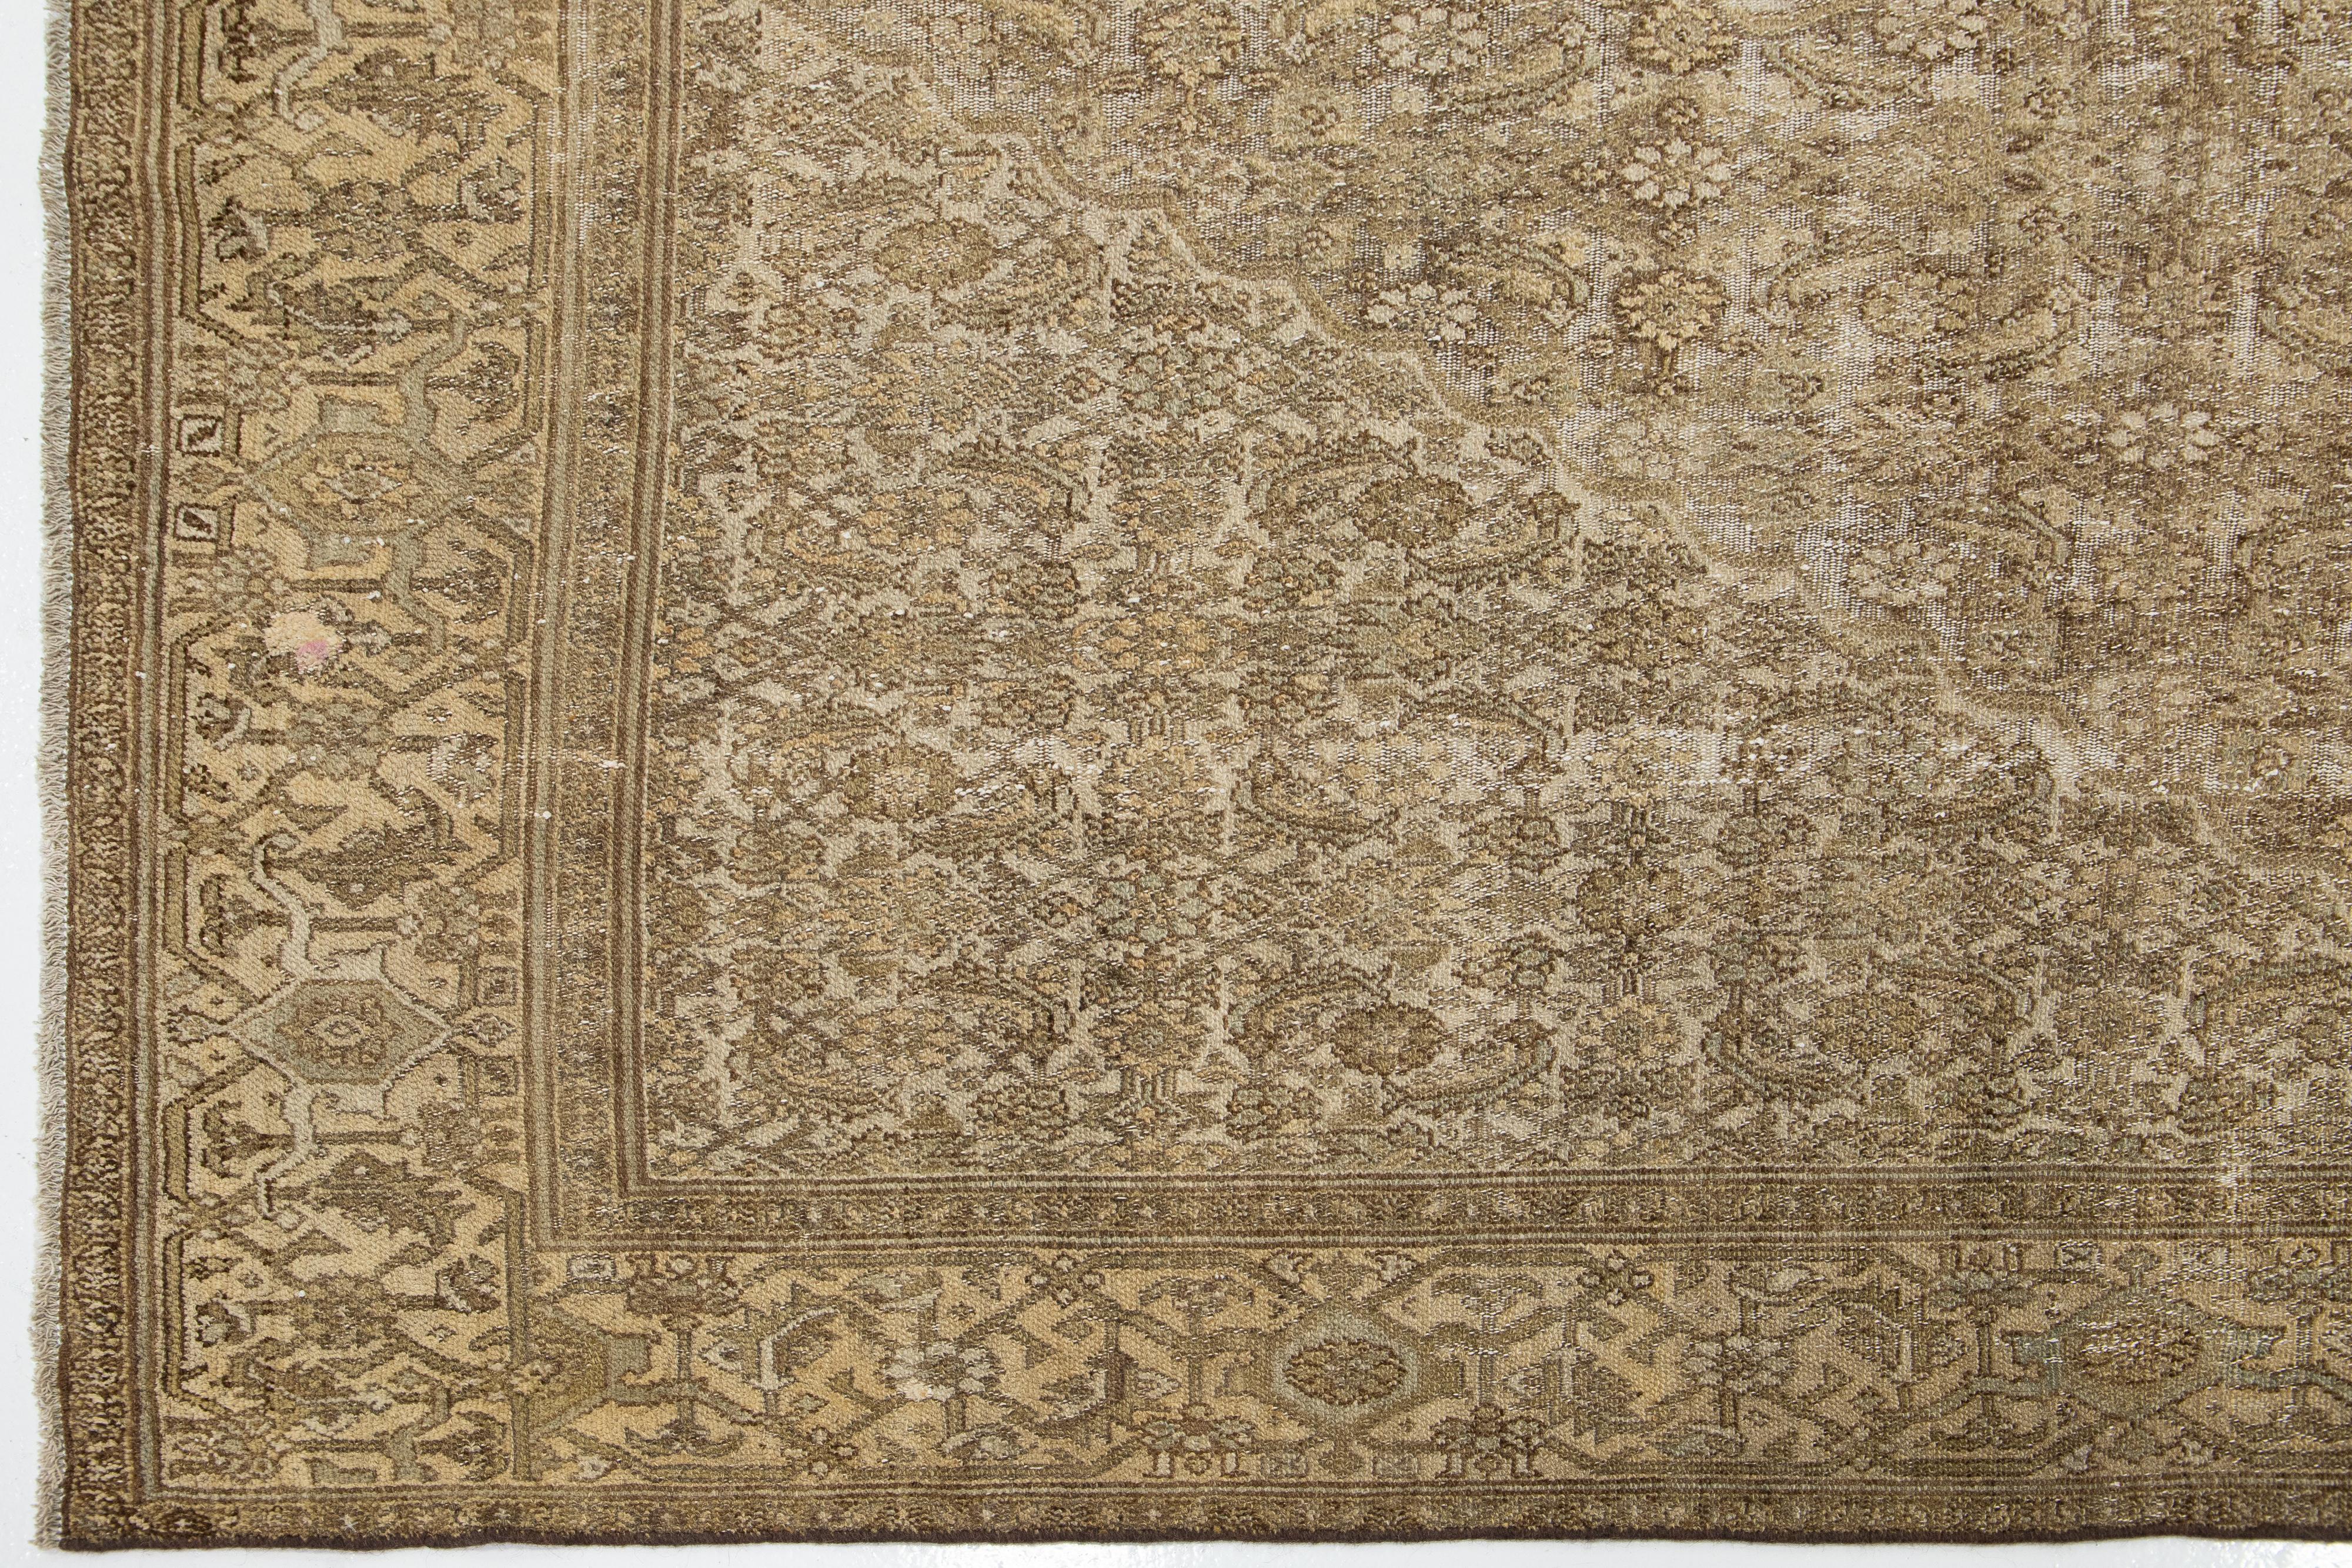 Brown Persian Malayer Wool Rug HandCrafted in the 1910s im Zustand „Gut“ im Angebot in Norwalk, CT